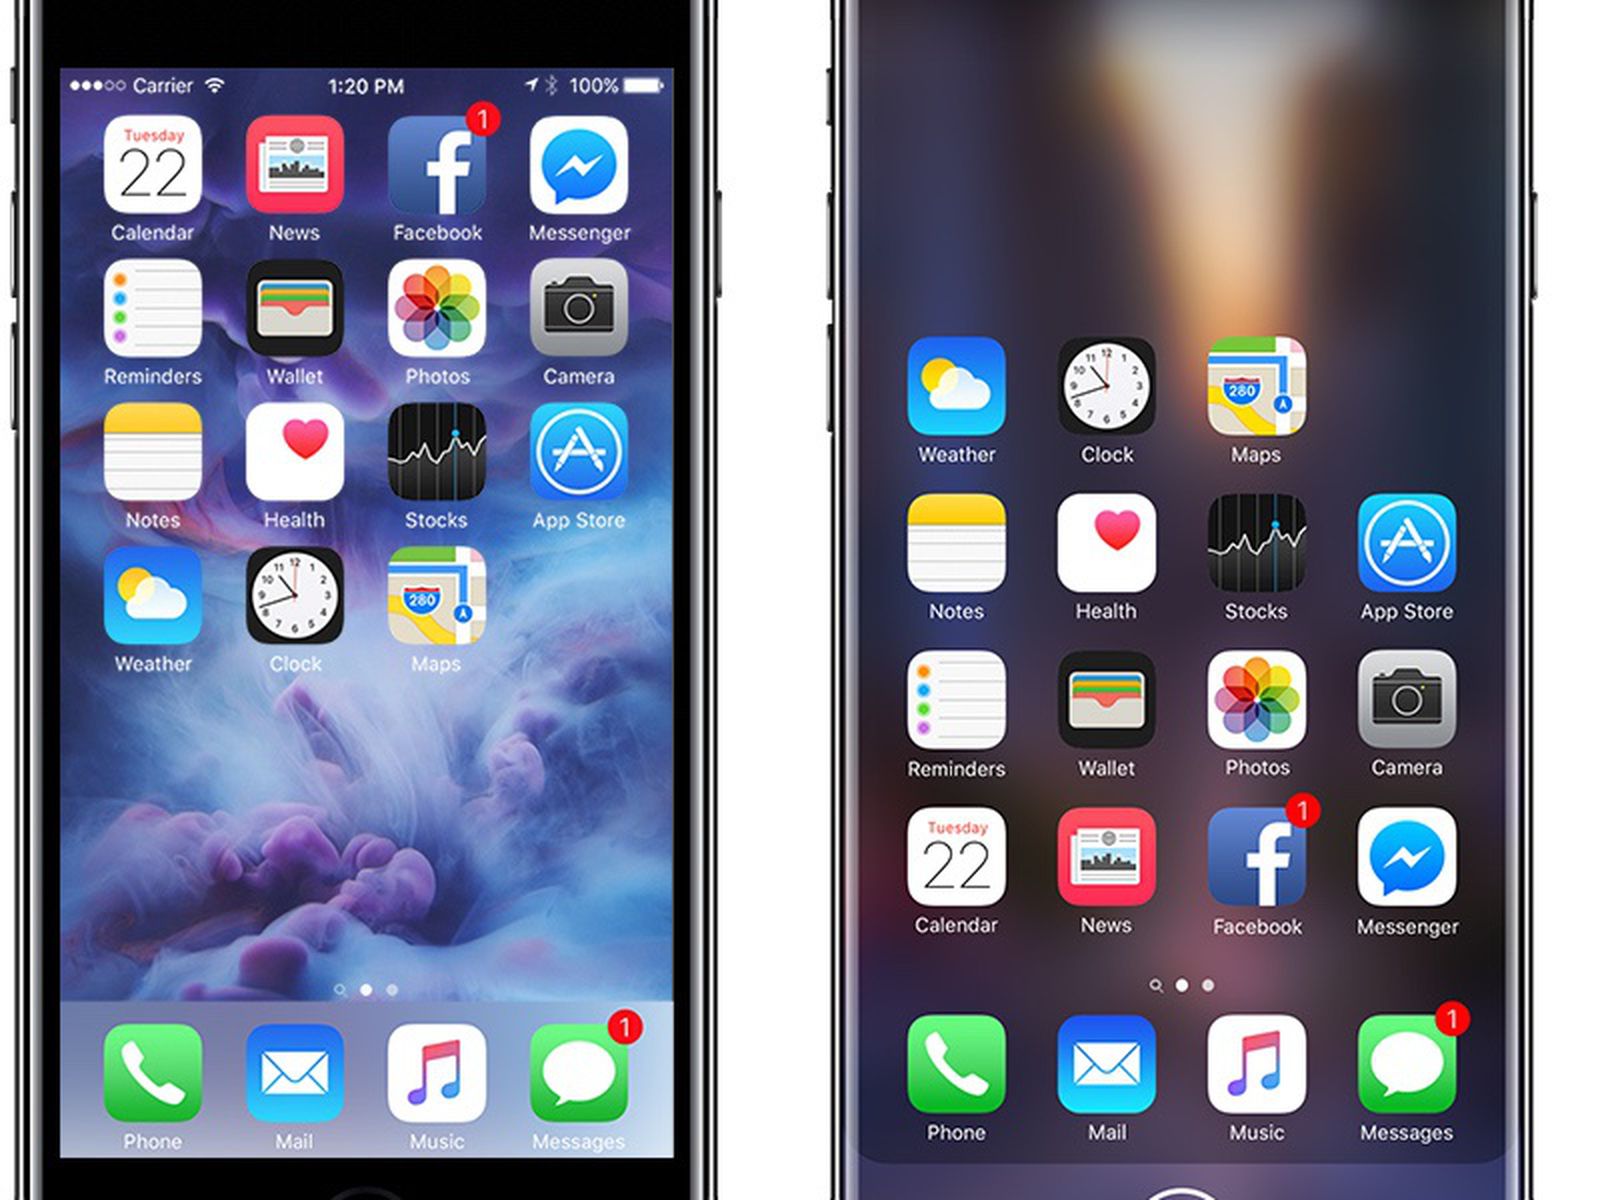 5 8 Inch Iphone Said To Have Curved Display But Not As Curved As Galaxy S7 Edge Macrumors